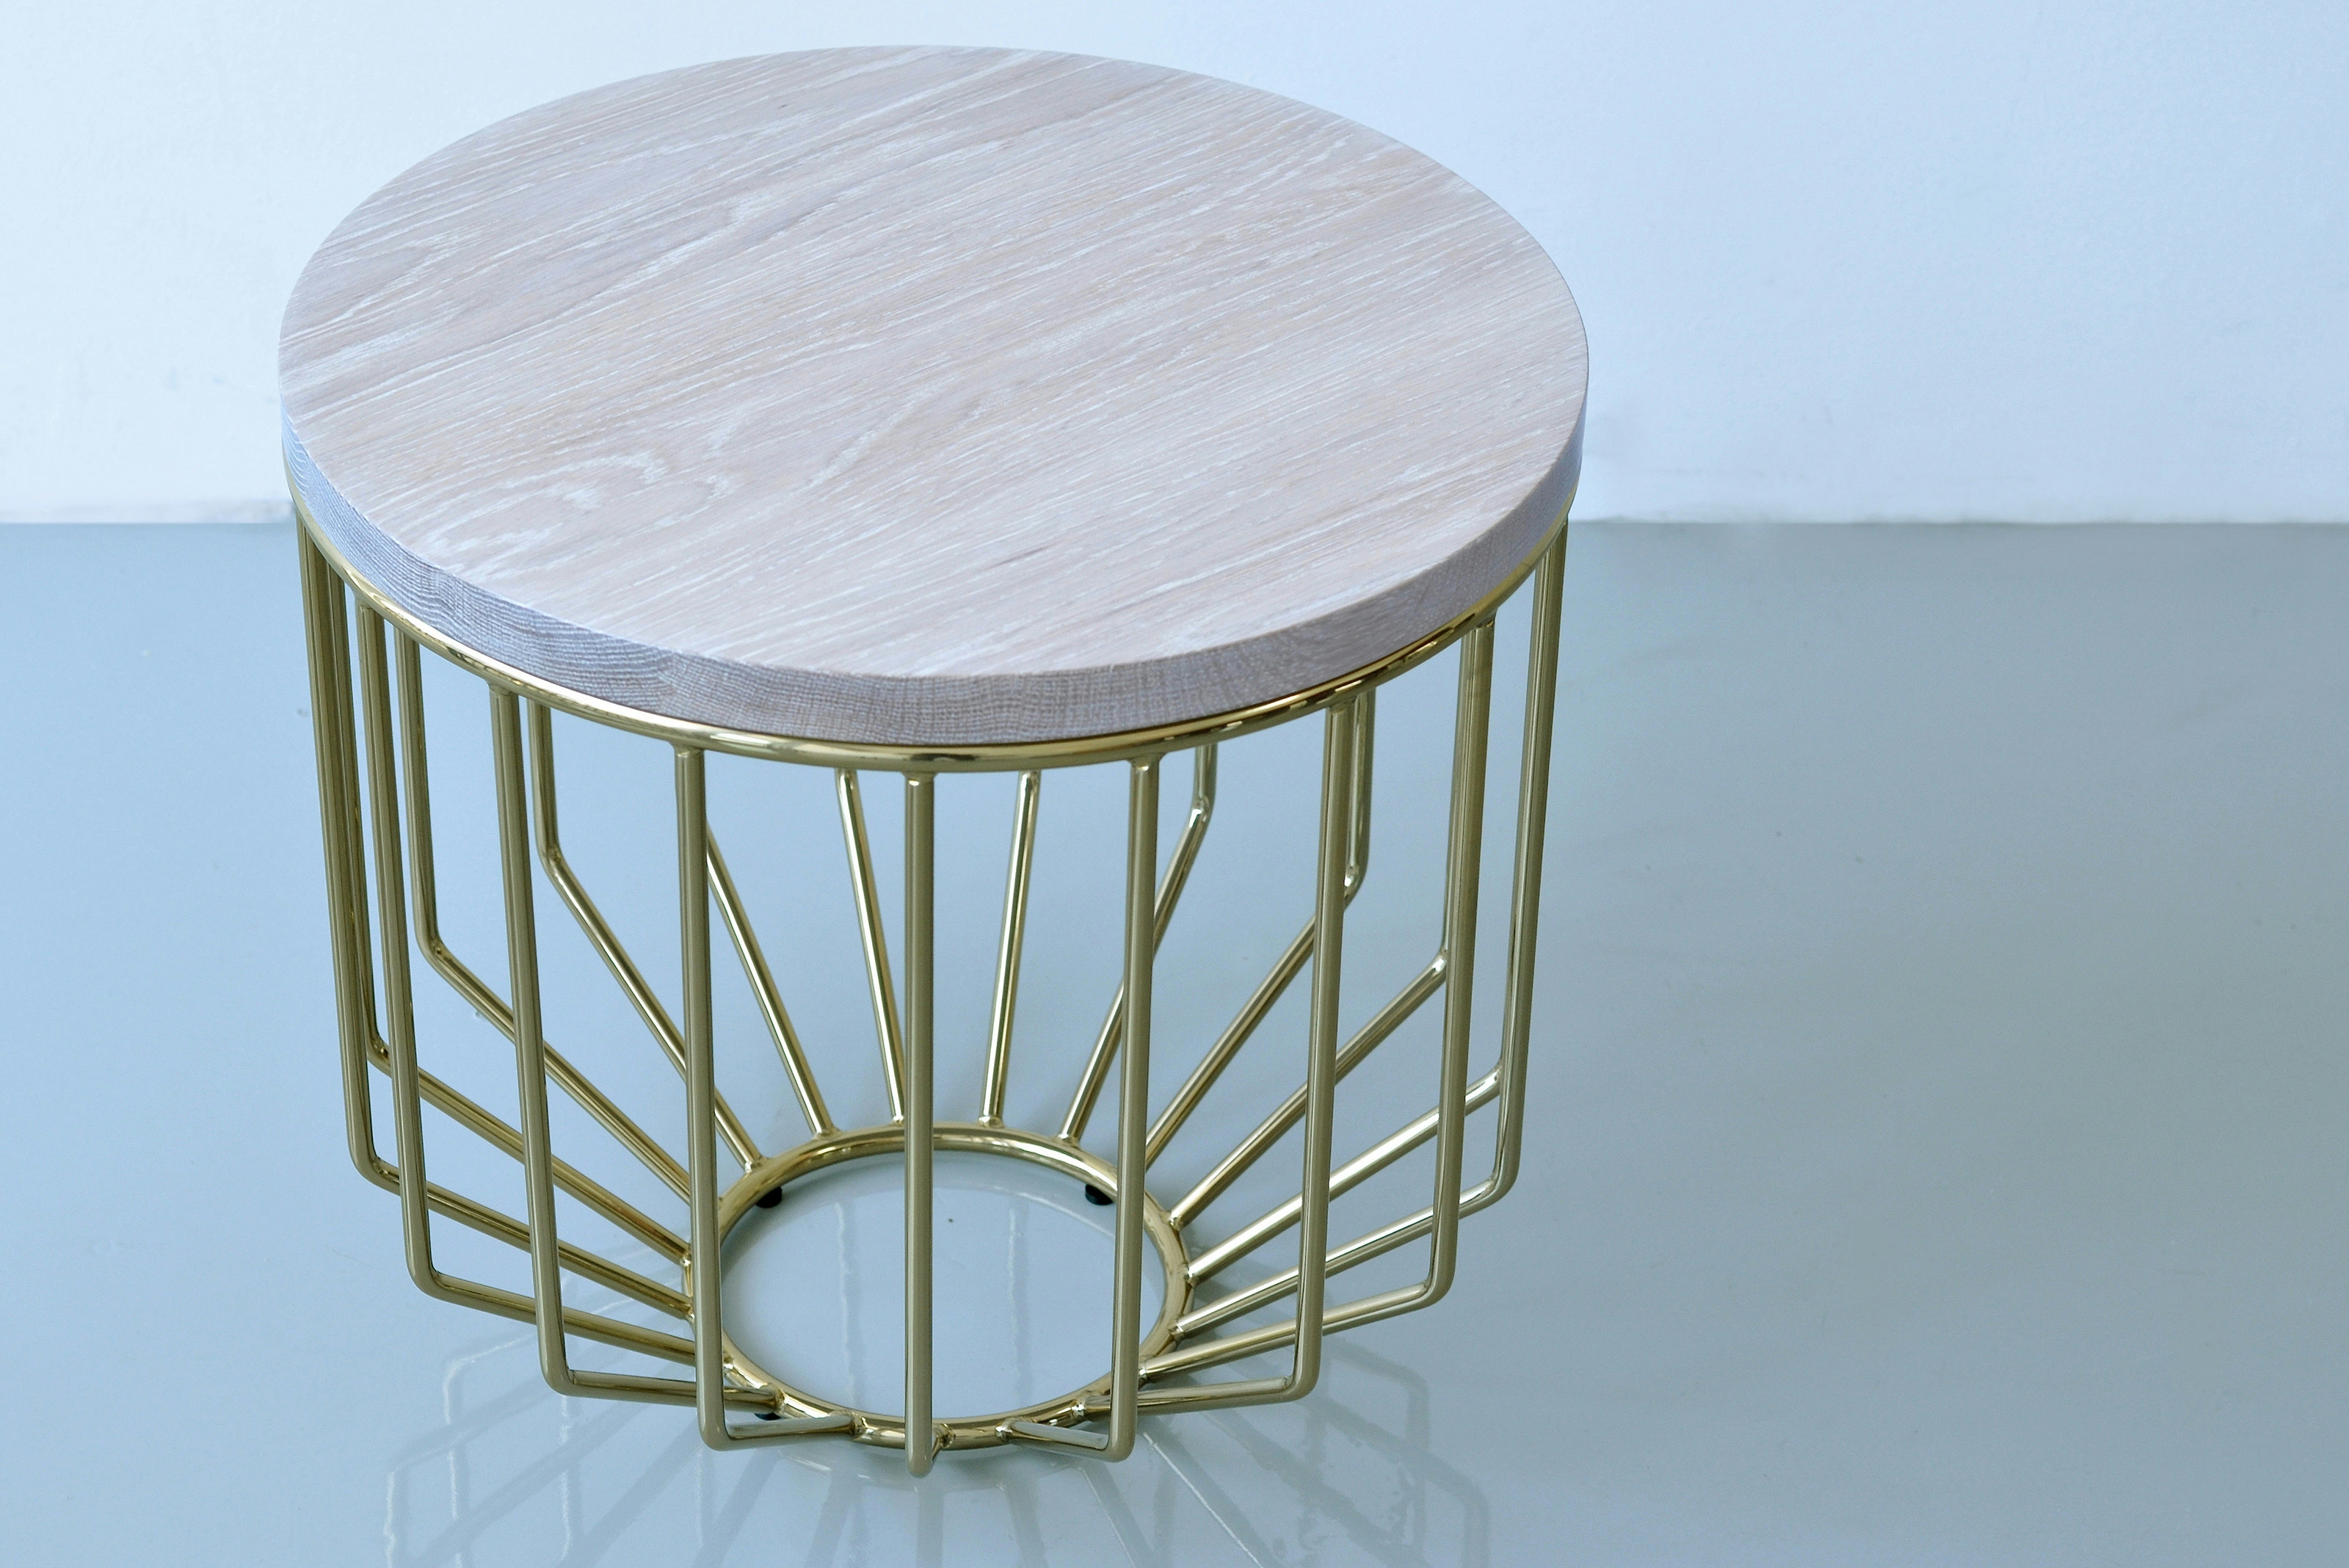 Phase Design Wired Side Table 7 Web